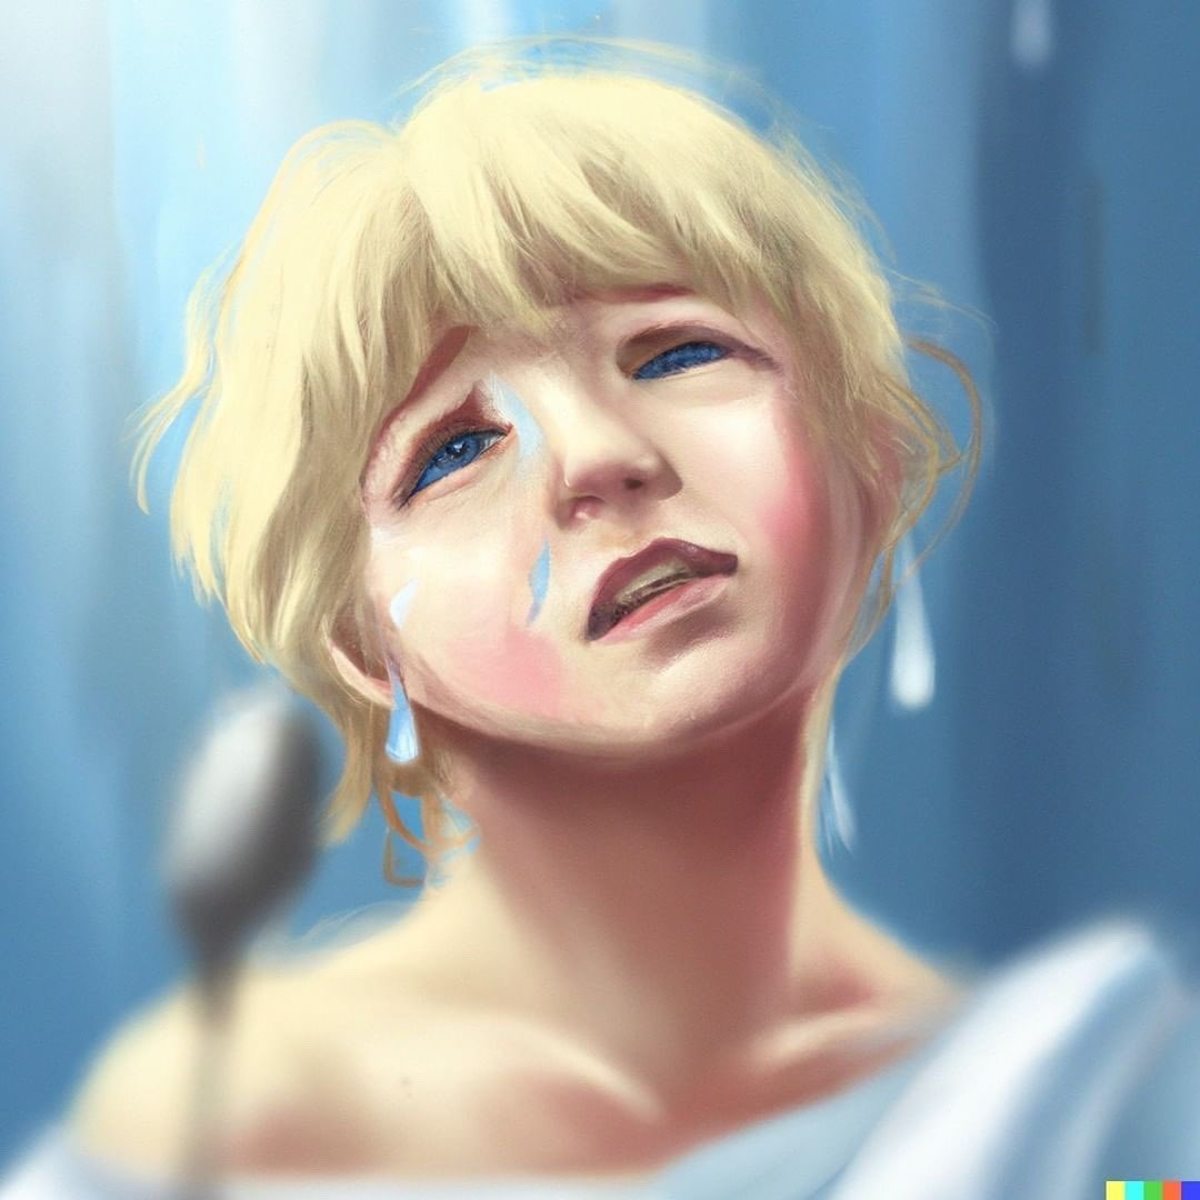 A brave young lady in deep pain, struggling to find herself while she sings, digital art  (Actual text prompt used)